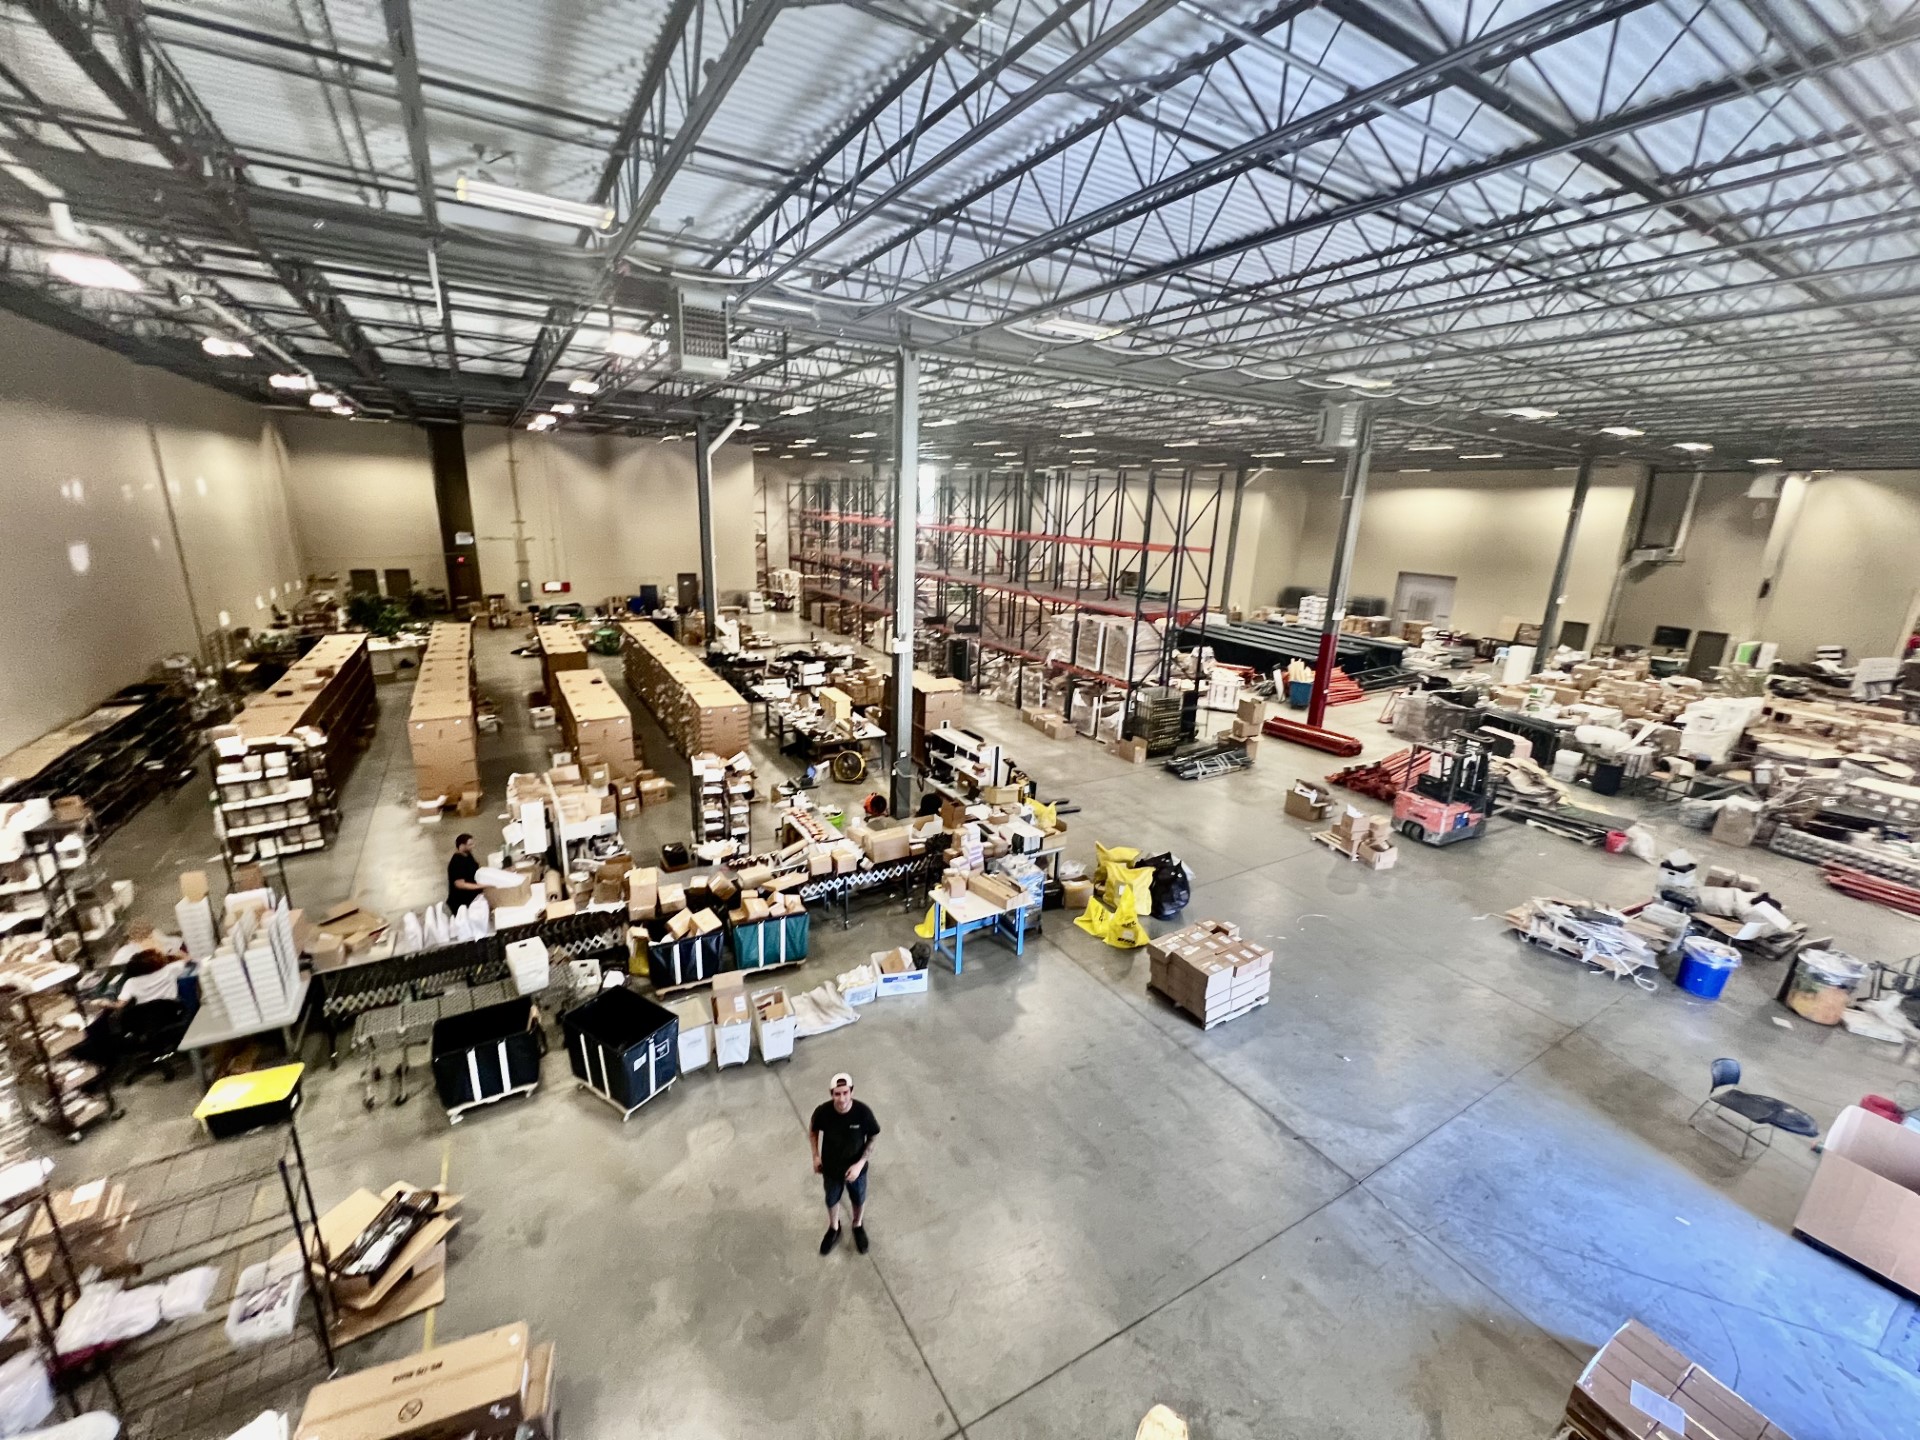 Overhead view of warehouse